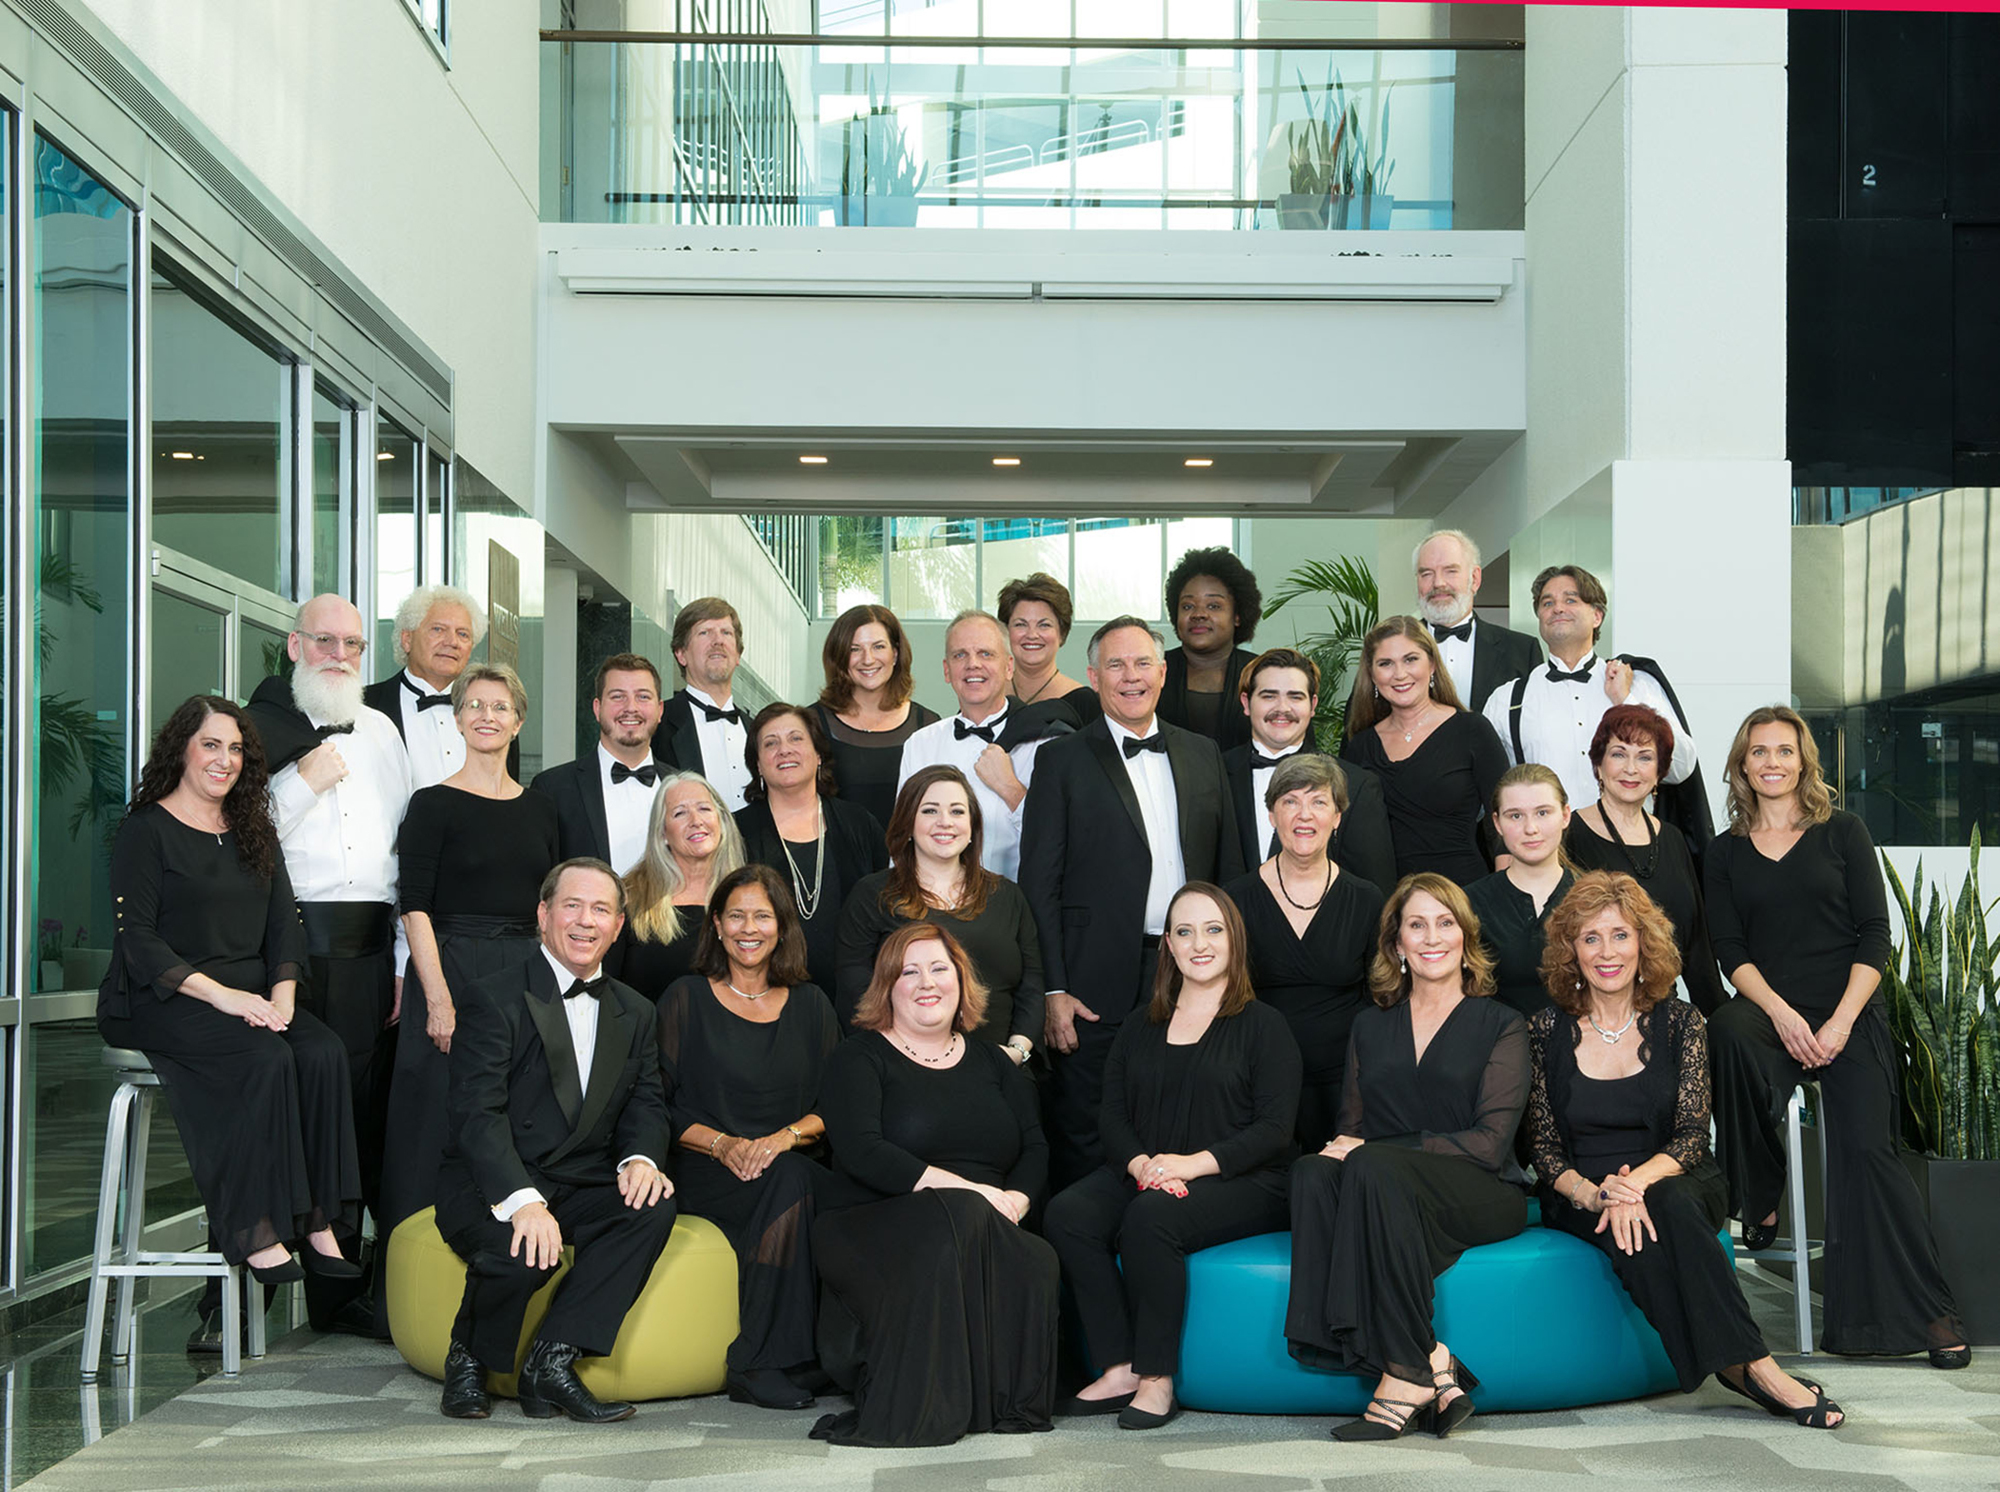 Choral Artists of Sarasota is celebrating its 40th anniversary season and Joseph Holt is celebrating his 10th anniversary as artistic director. Courtesy photo